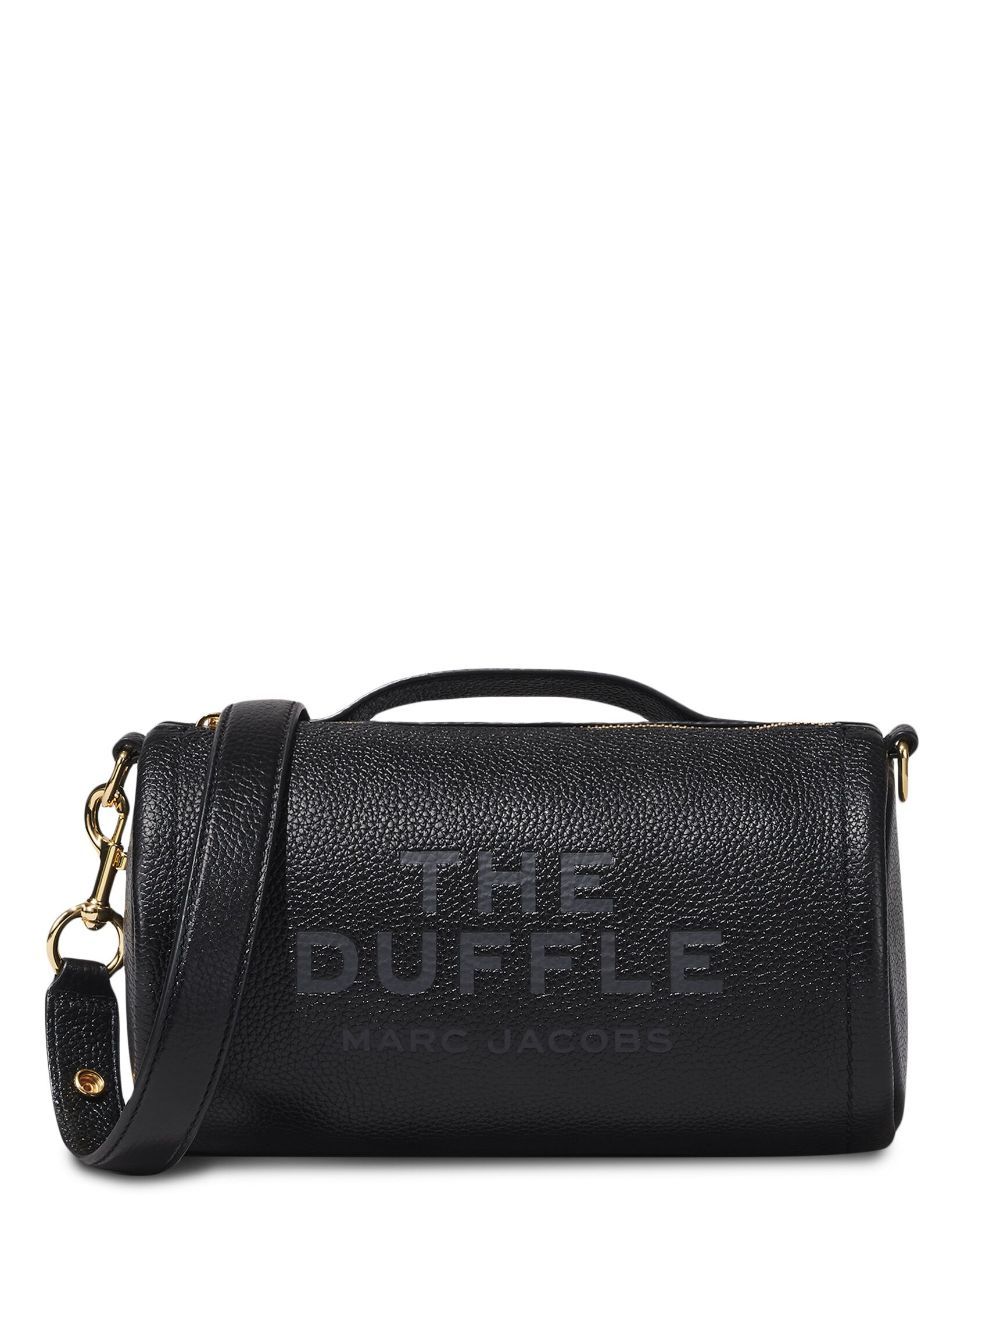 Marc Jacobs Leather Duffle Bag